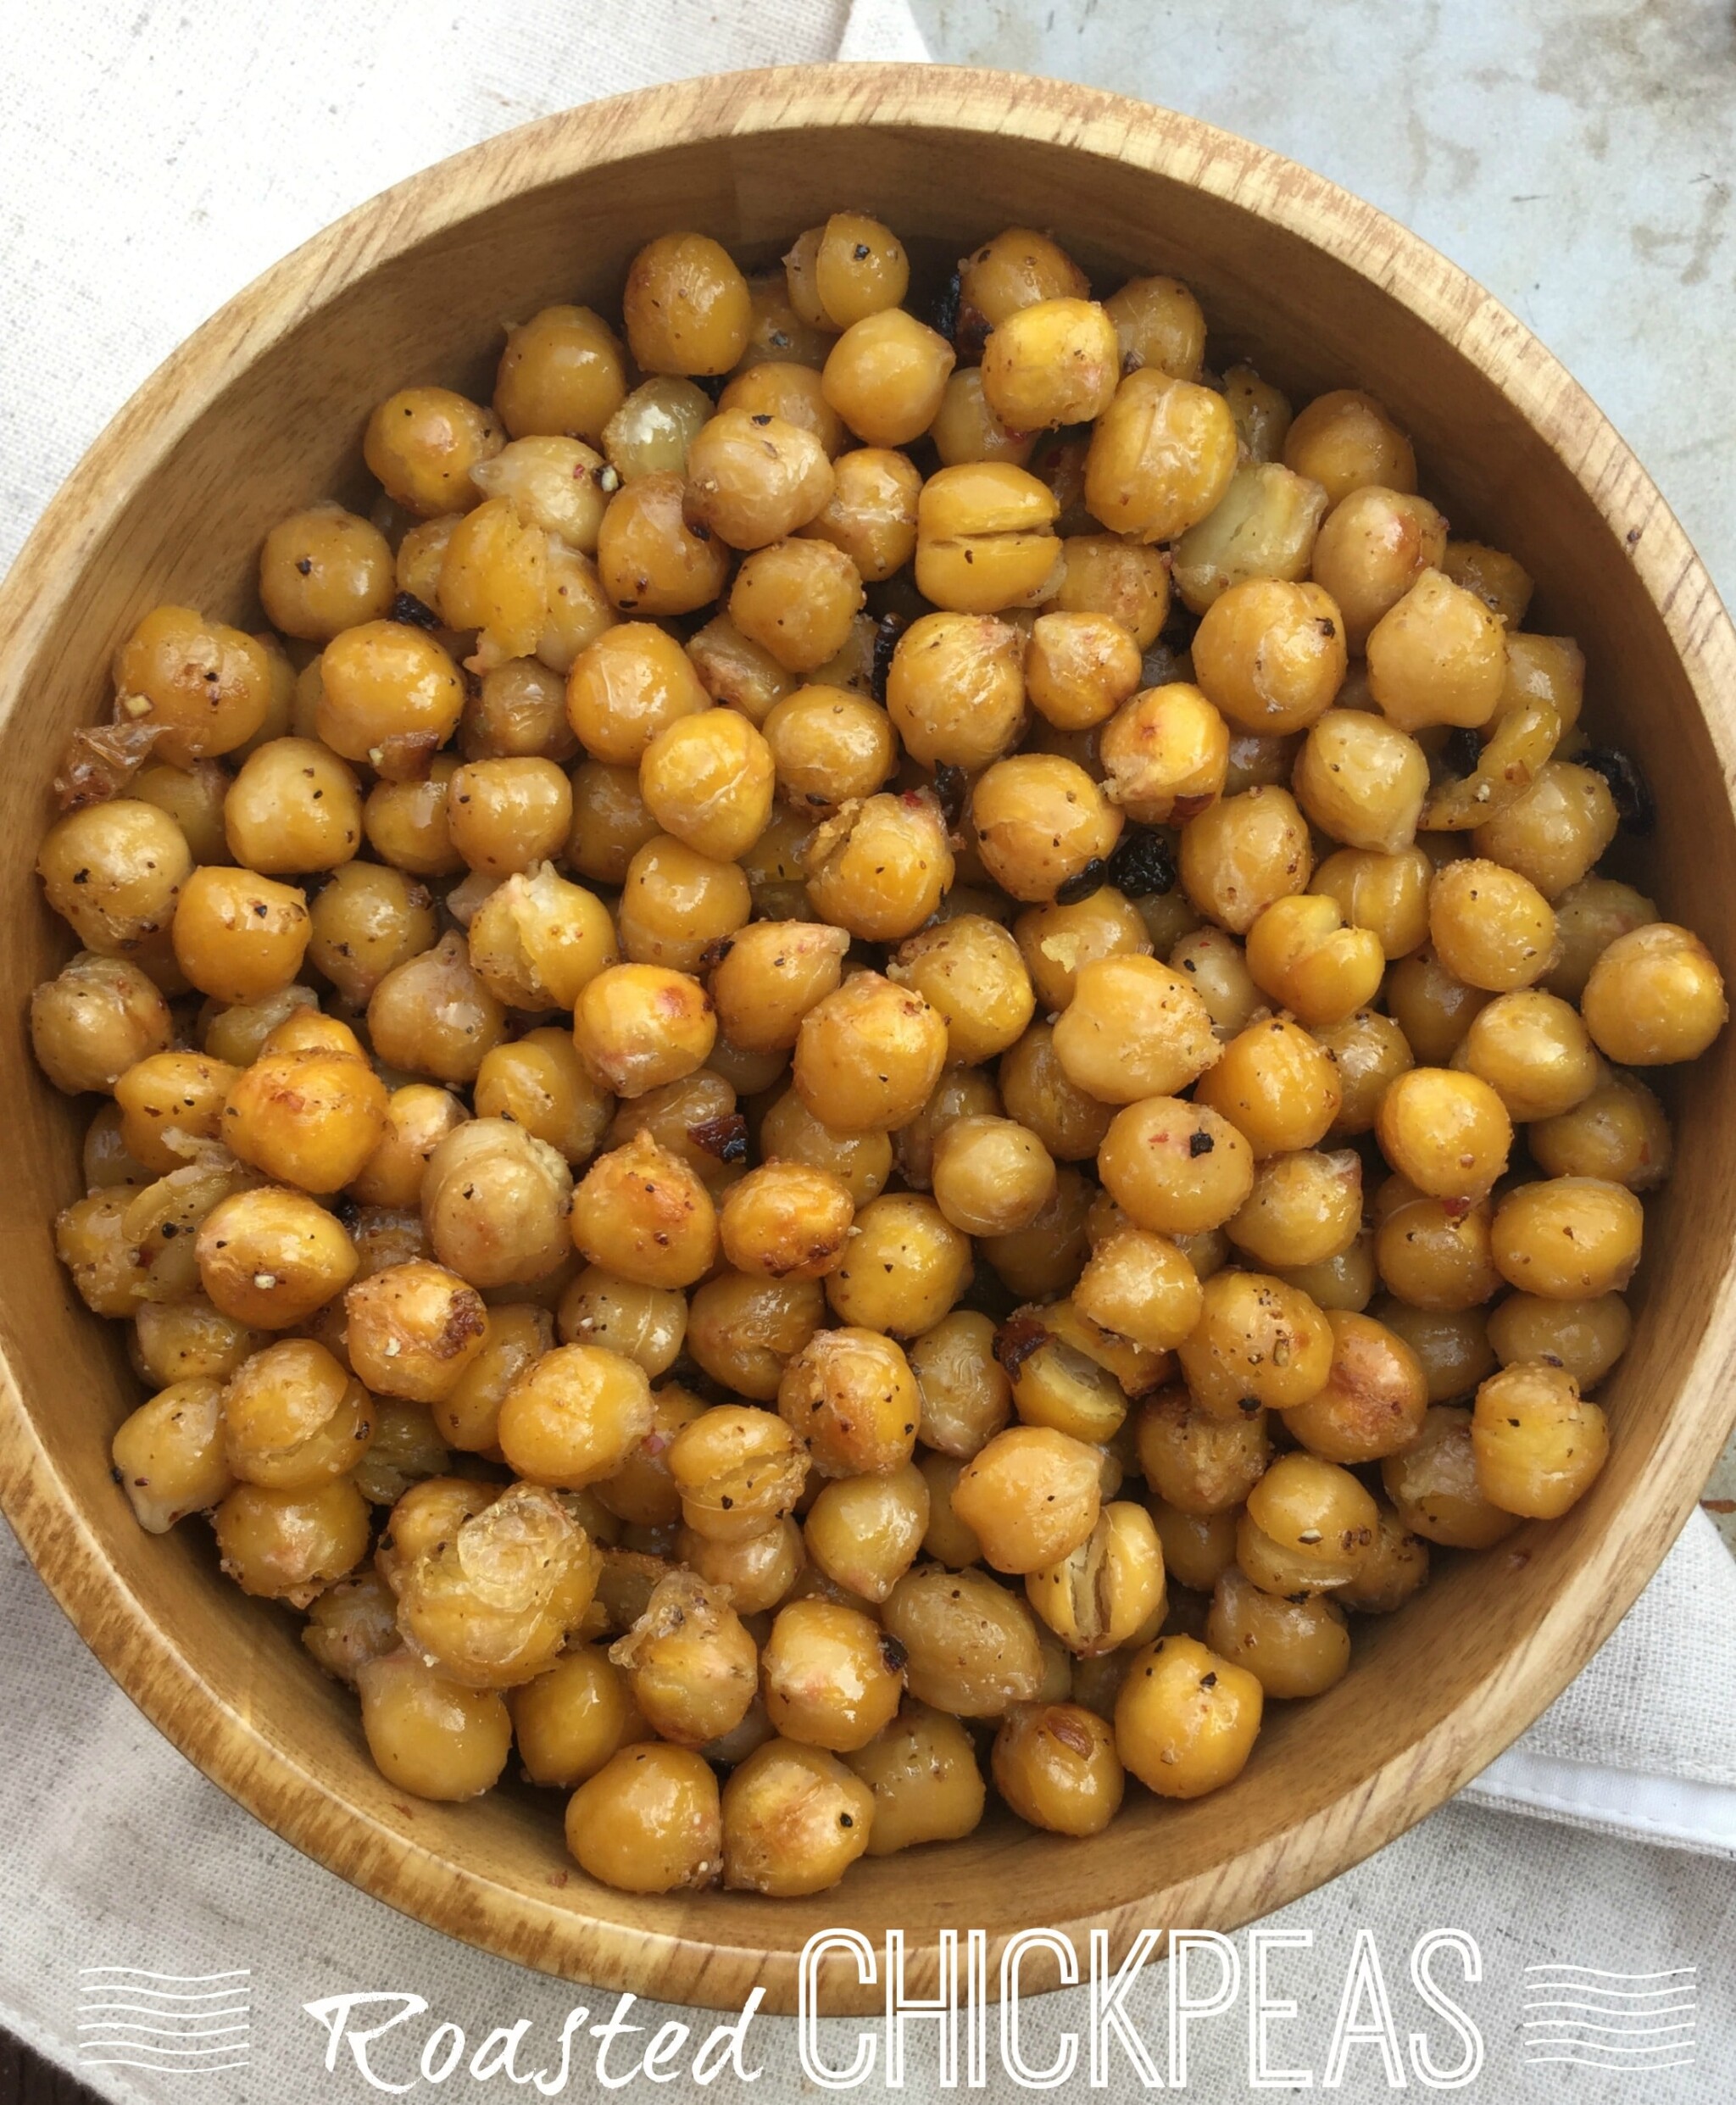 Oven roasted chickpeas deliciously flavored with garlic, chopped shallots and other spices. A great choice of healthy snack!